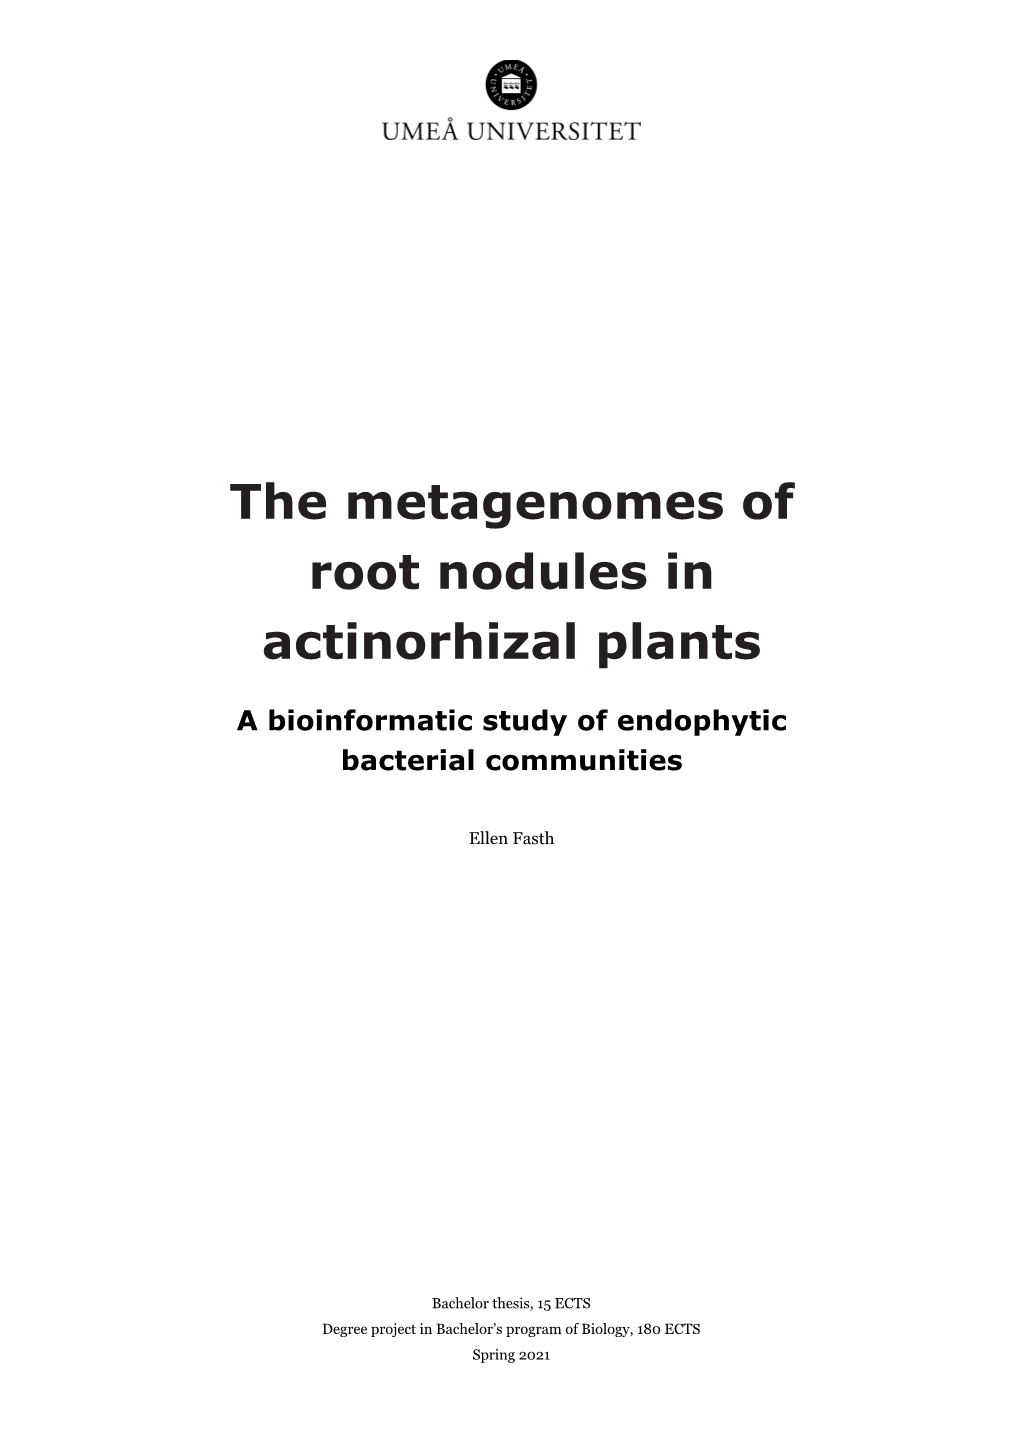 The Metagenomes of Root Nodules in Actinorhizal Plants